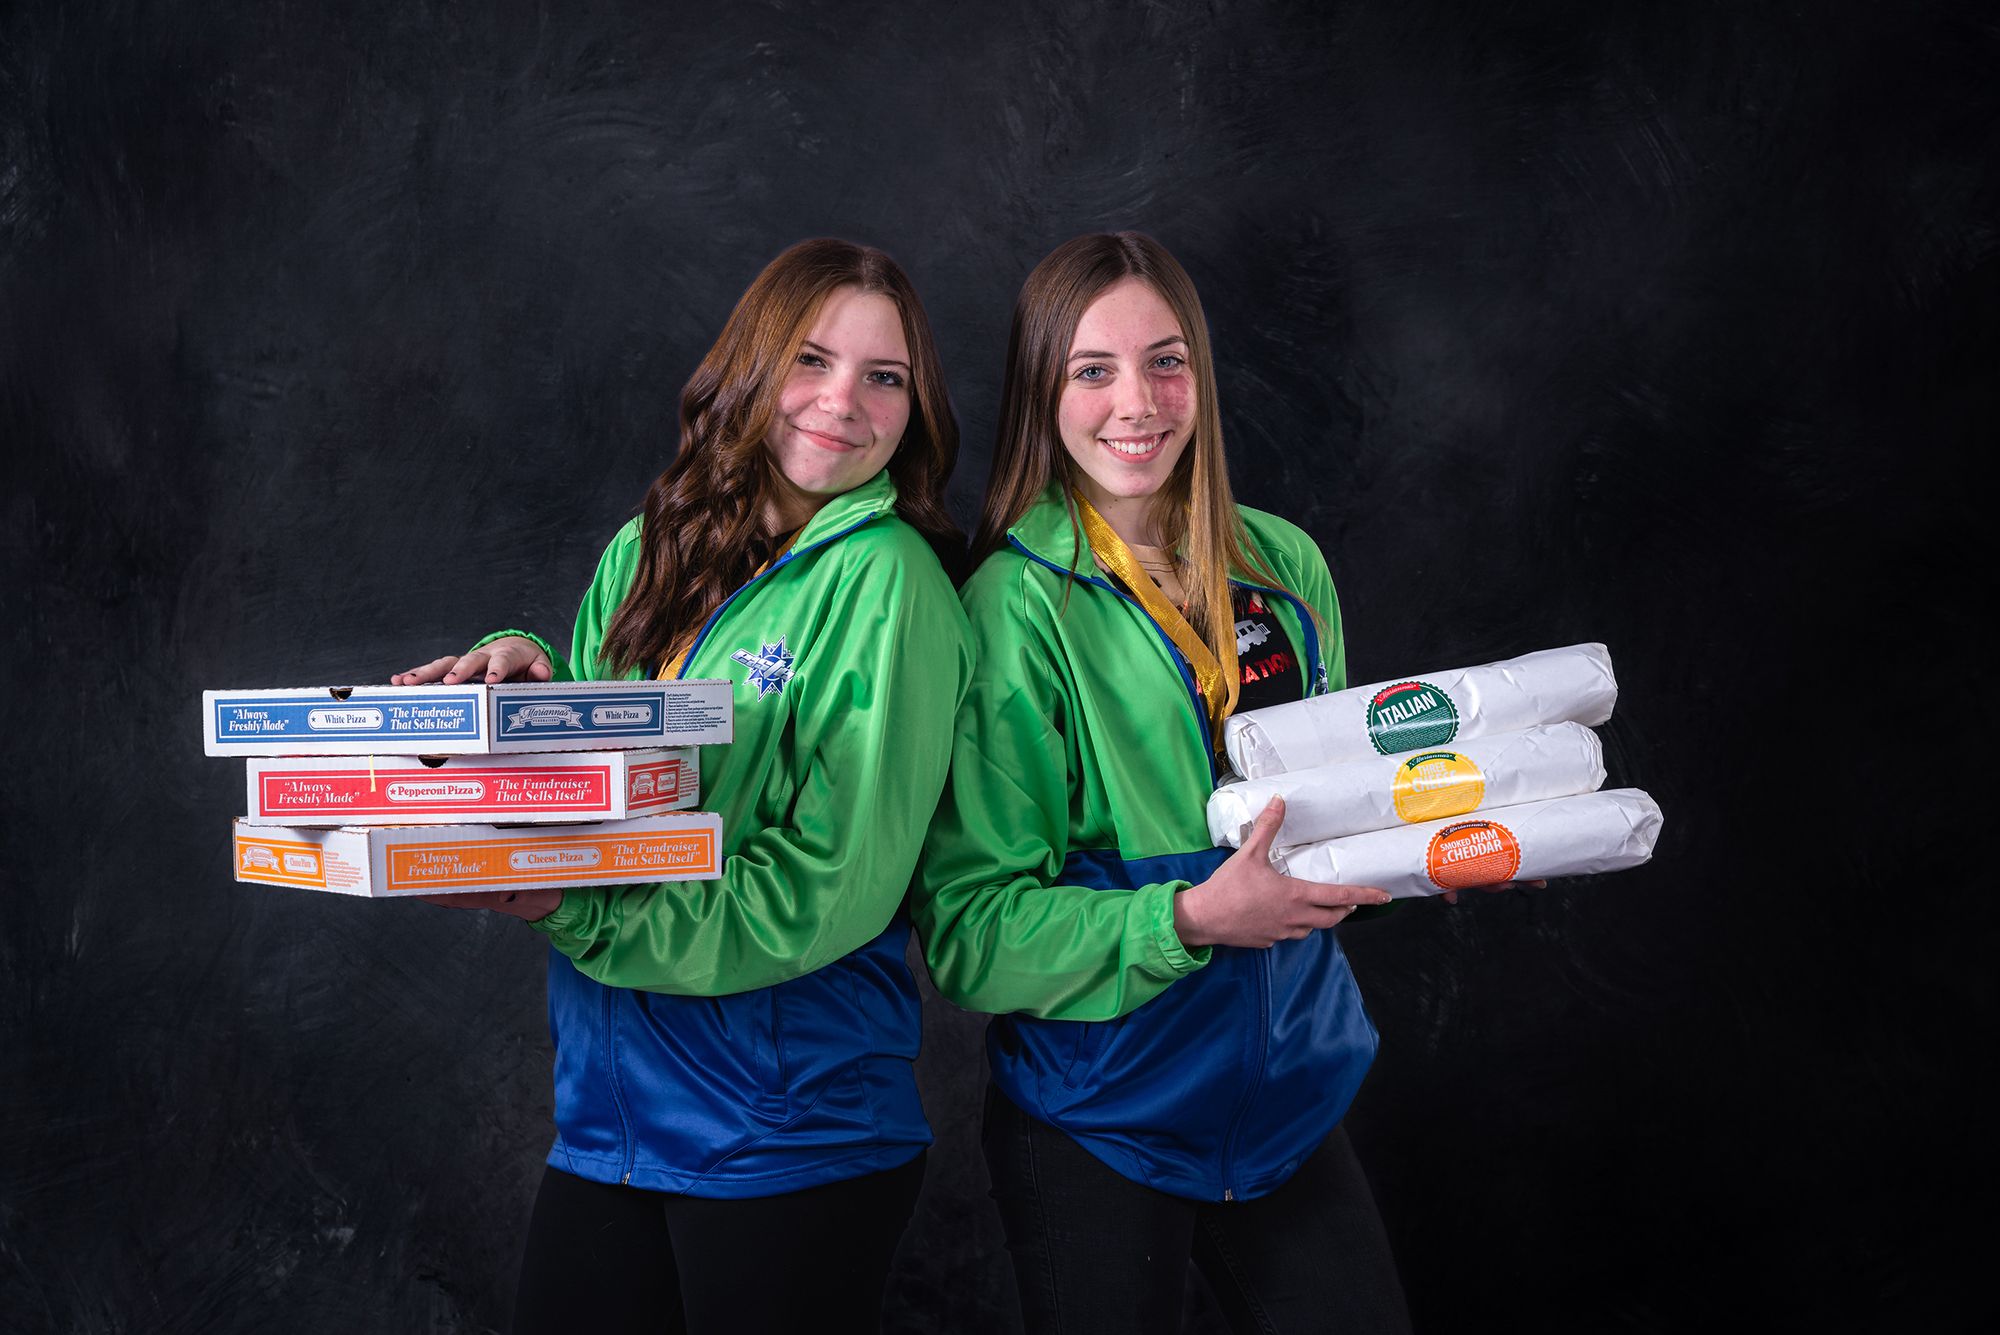 two young women in green and blue sports jerseys holding pizza boxes and wrapped hoagies